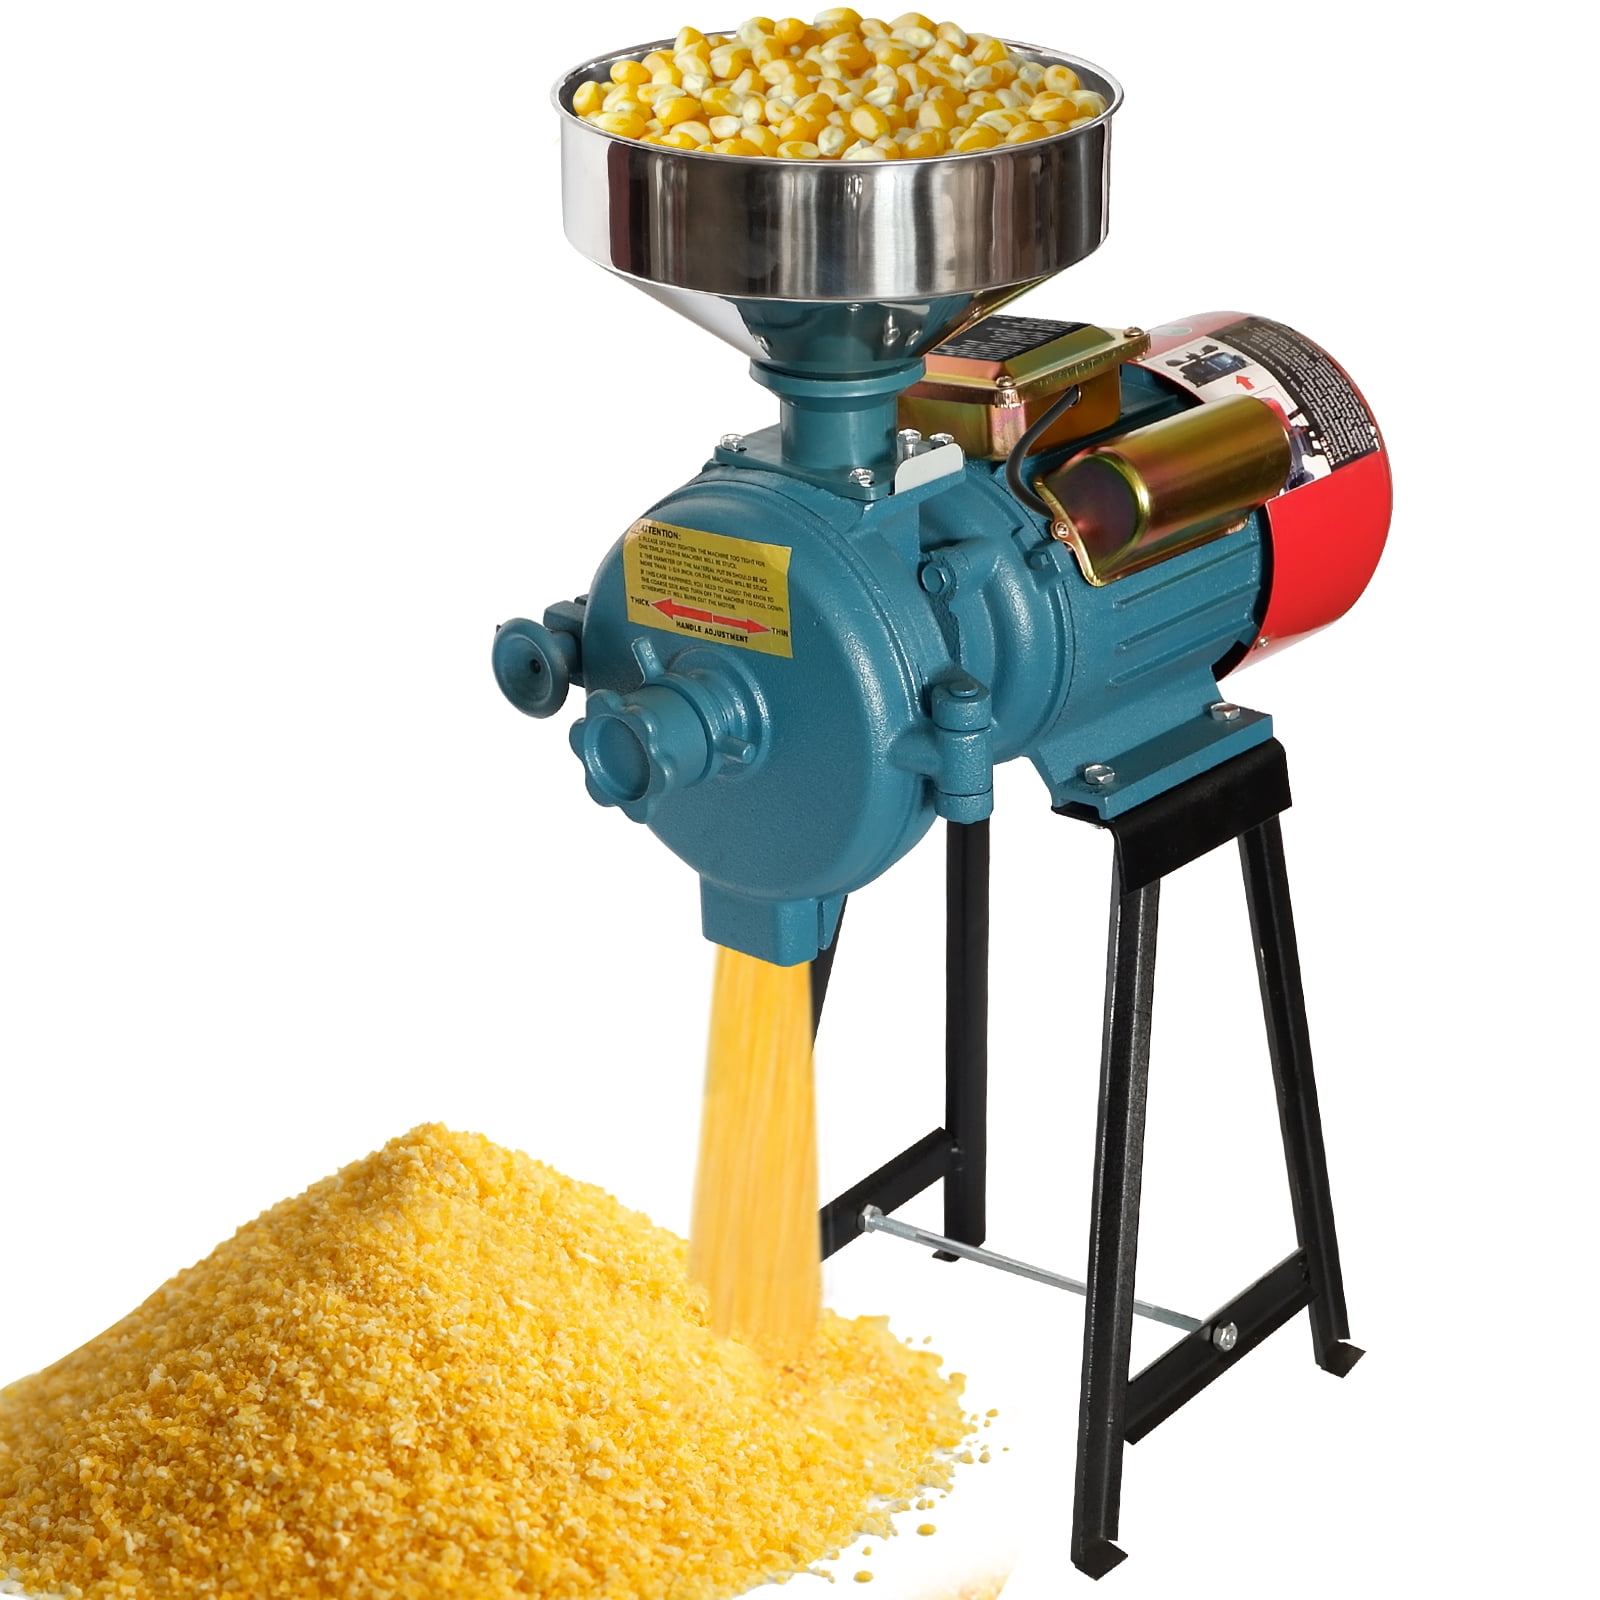 Details about   2200W Electric Grinder 110V Mill Grain Corn Wheat Feed/Flour Wet&Dry Cereals US 